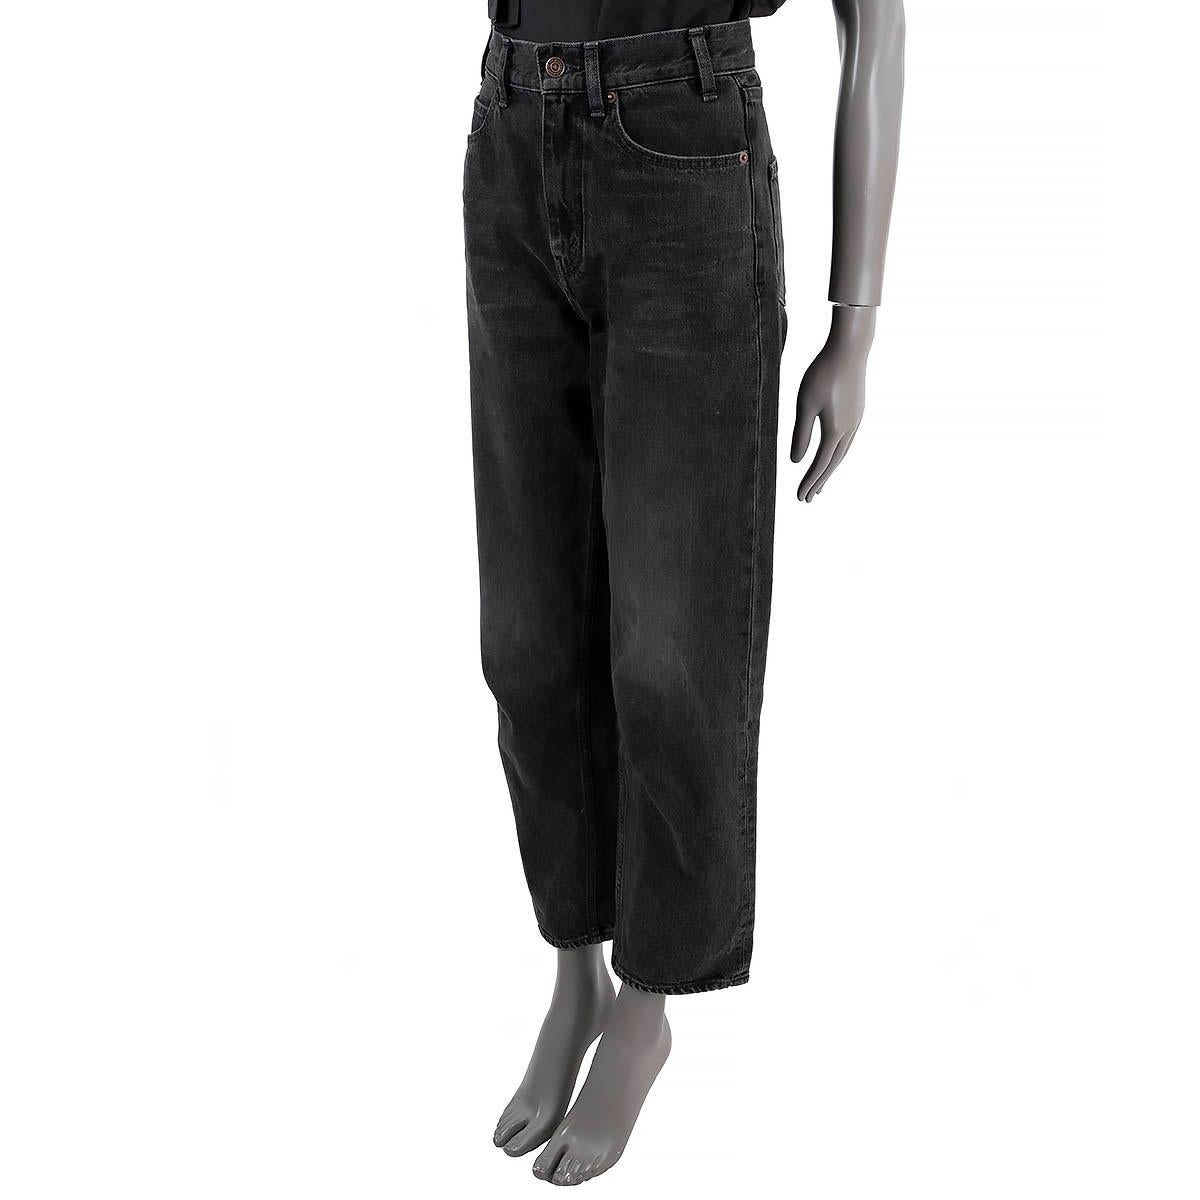 100% authentic Celine Margaret high waisted straight-cut jeans in vintage black cotton (100%). Have been worn and are in excellent condition. 

Measurements
Model	2N500511N.38VB
Tag Size	27
Size	XS
Waist From	68cm (26.5in)
Hips From	96cm